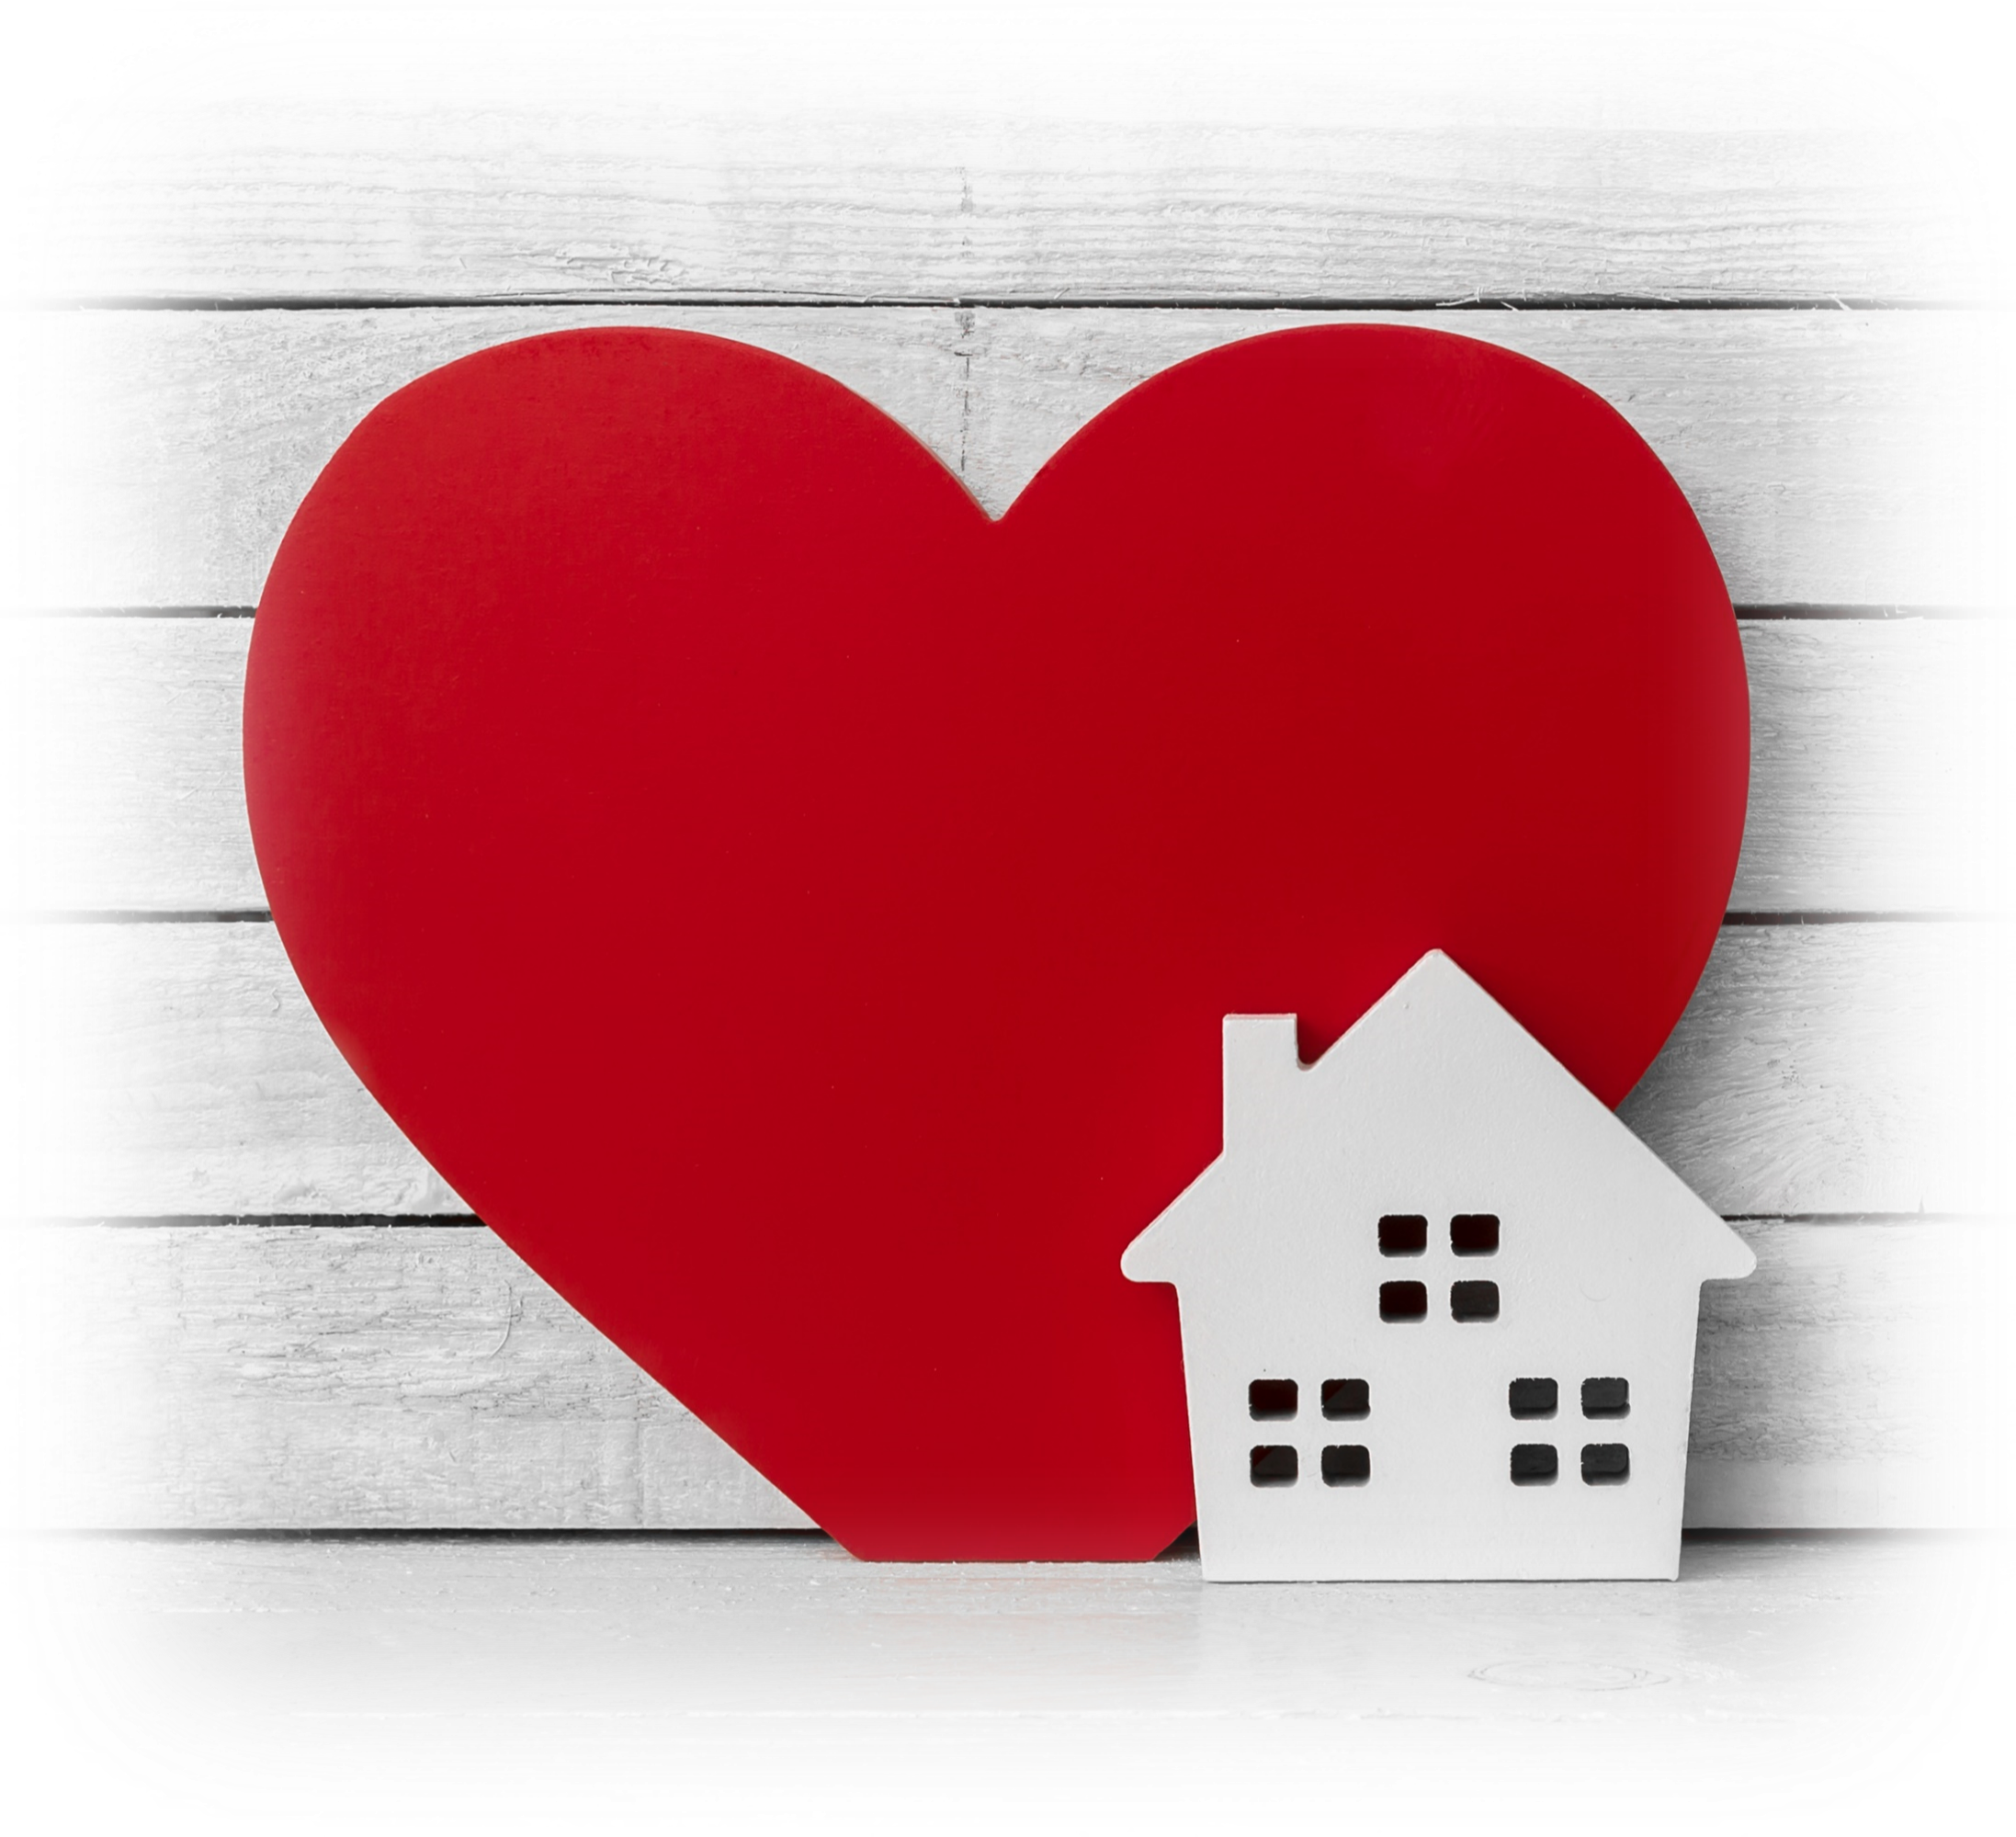 red heart with house image